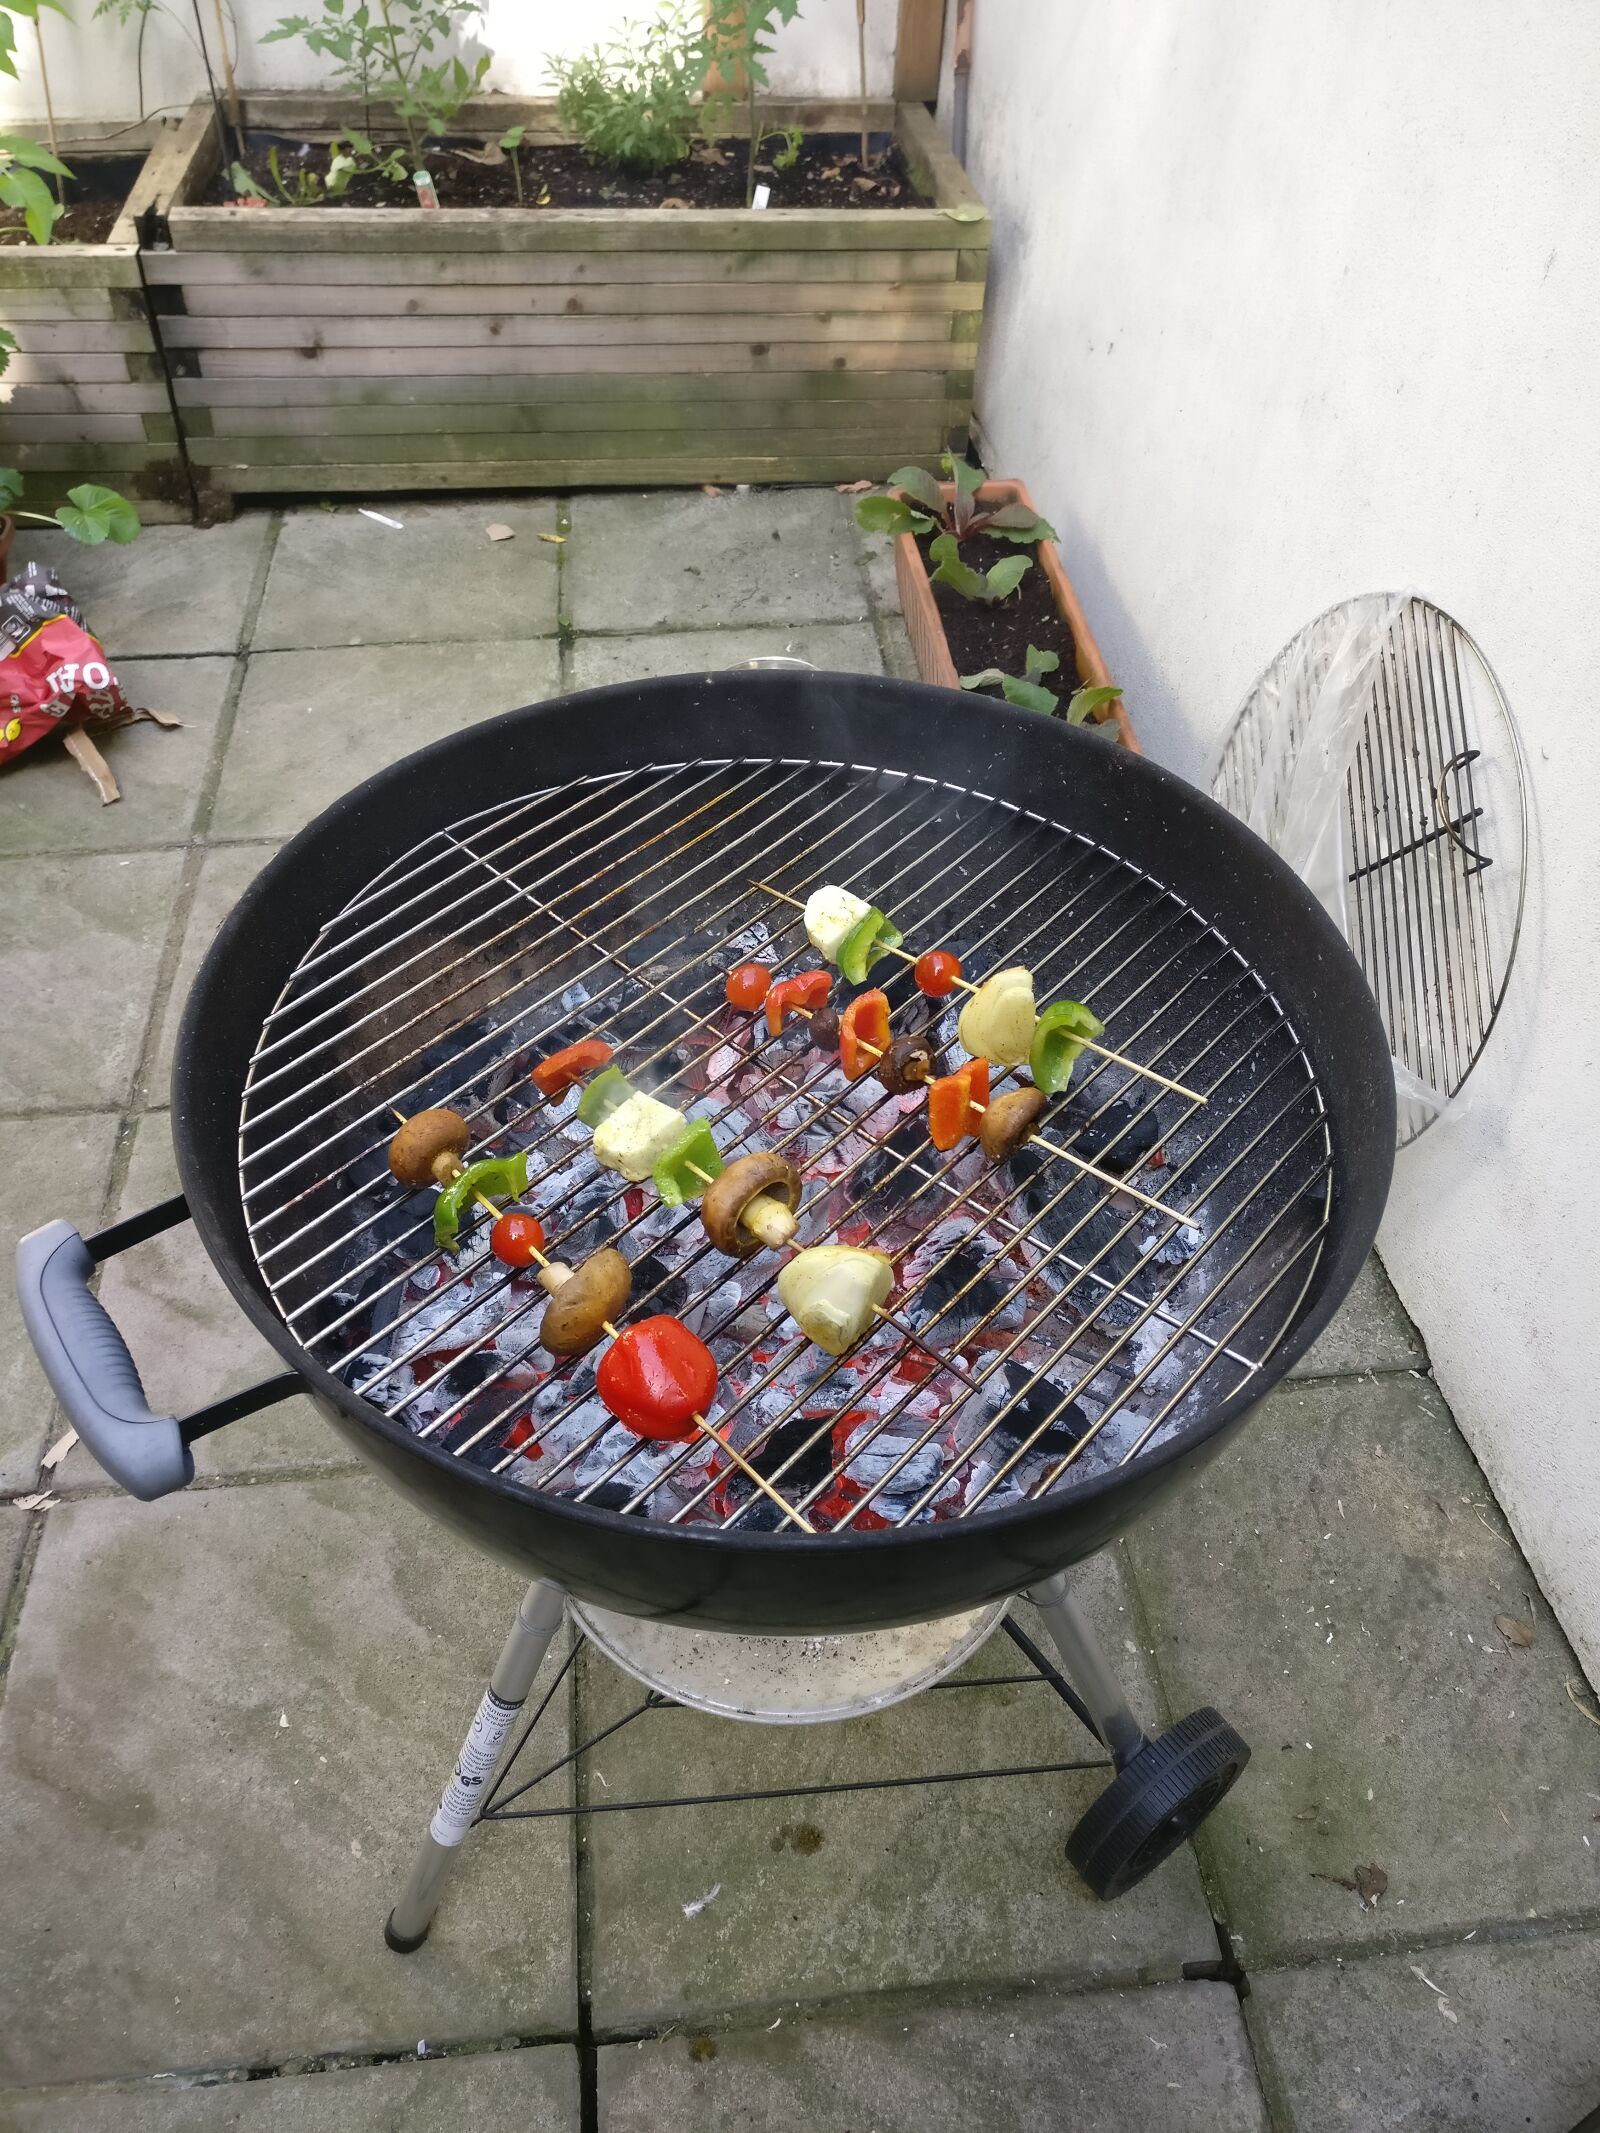 OnePlus A3003 sample photo. Barbecue, grill, vegetable, vegetables photography